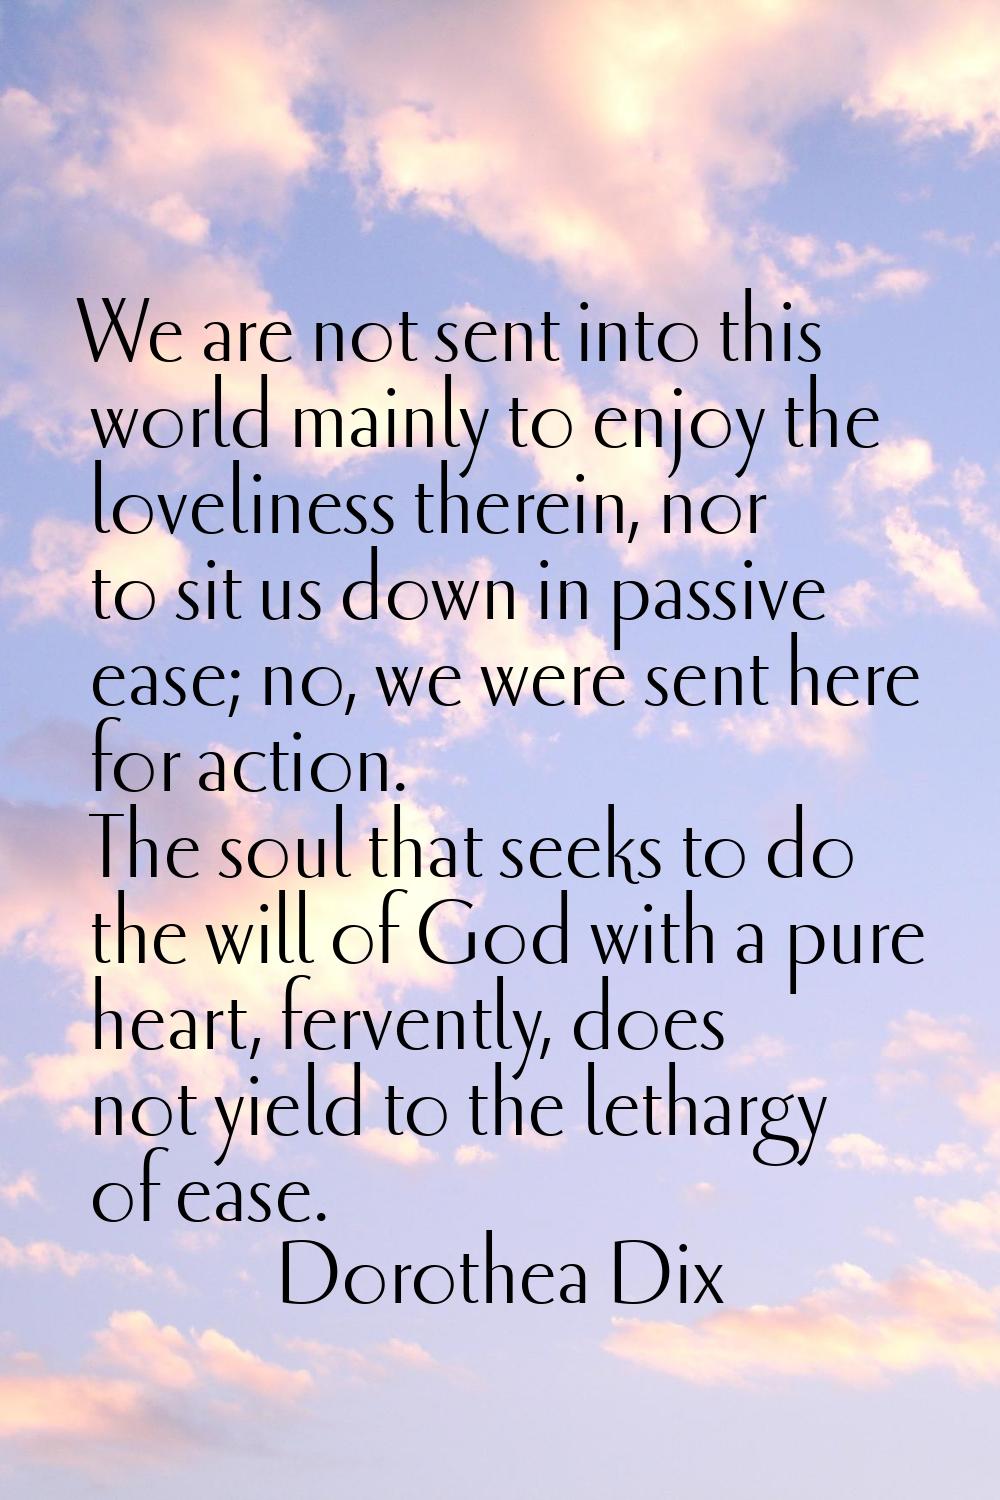 We are not sent into this world mainly to enjoy the loveliness therein, nor to sit us down in passi